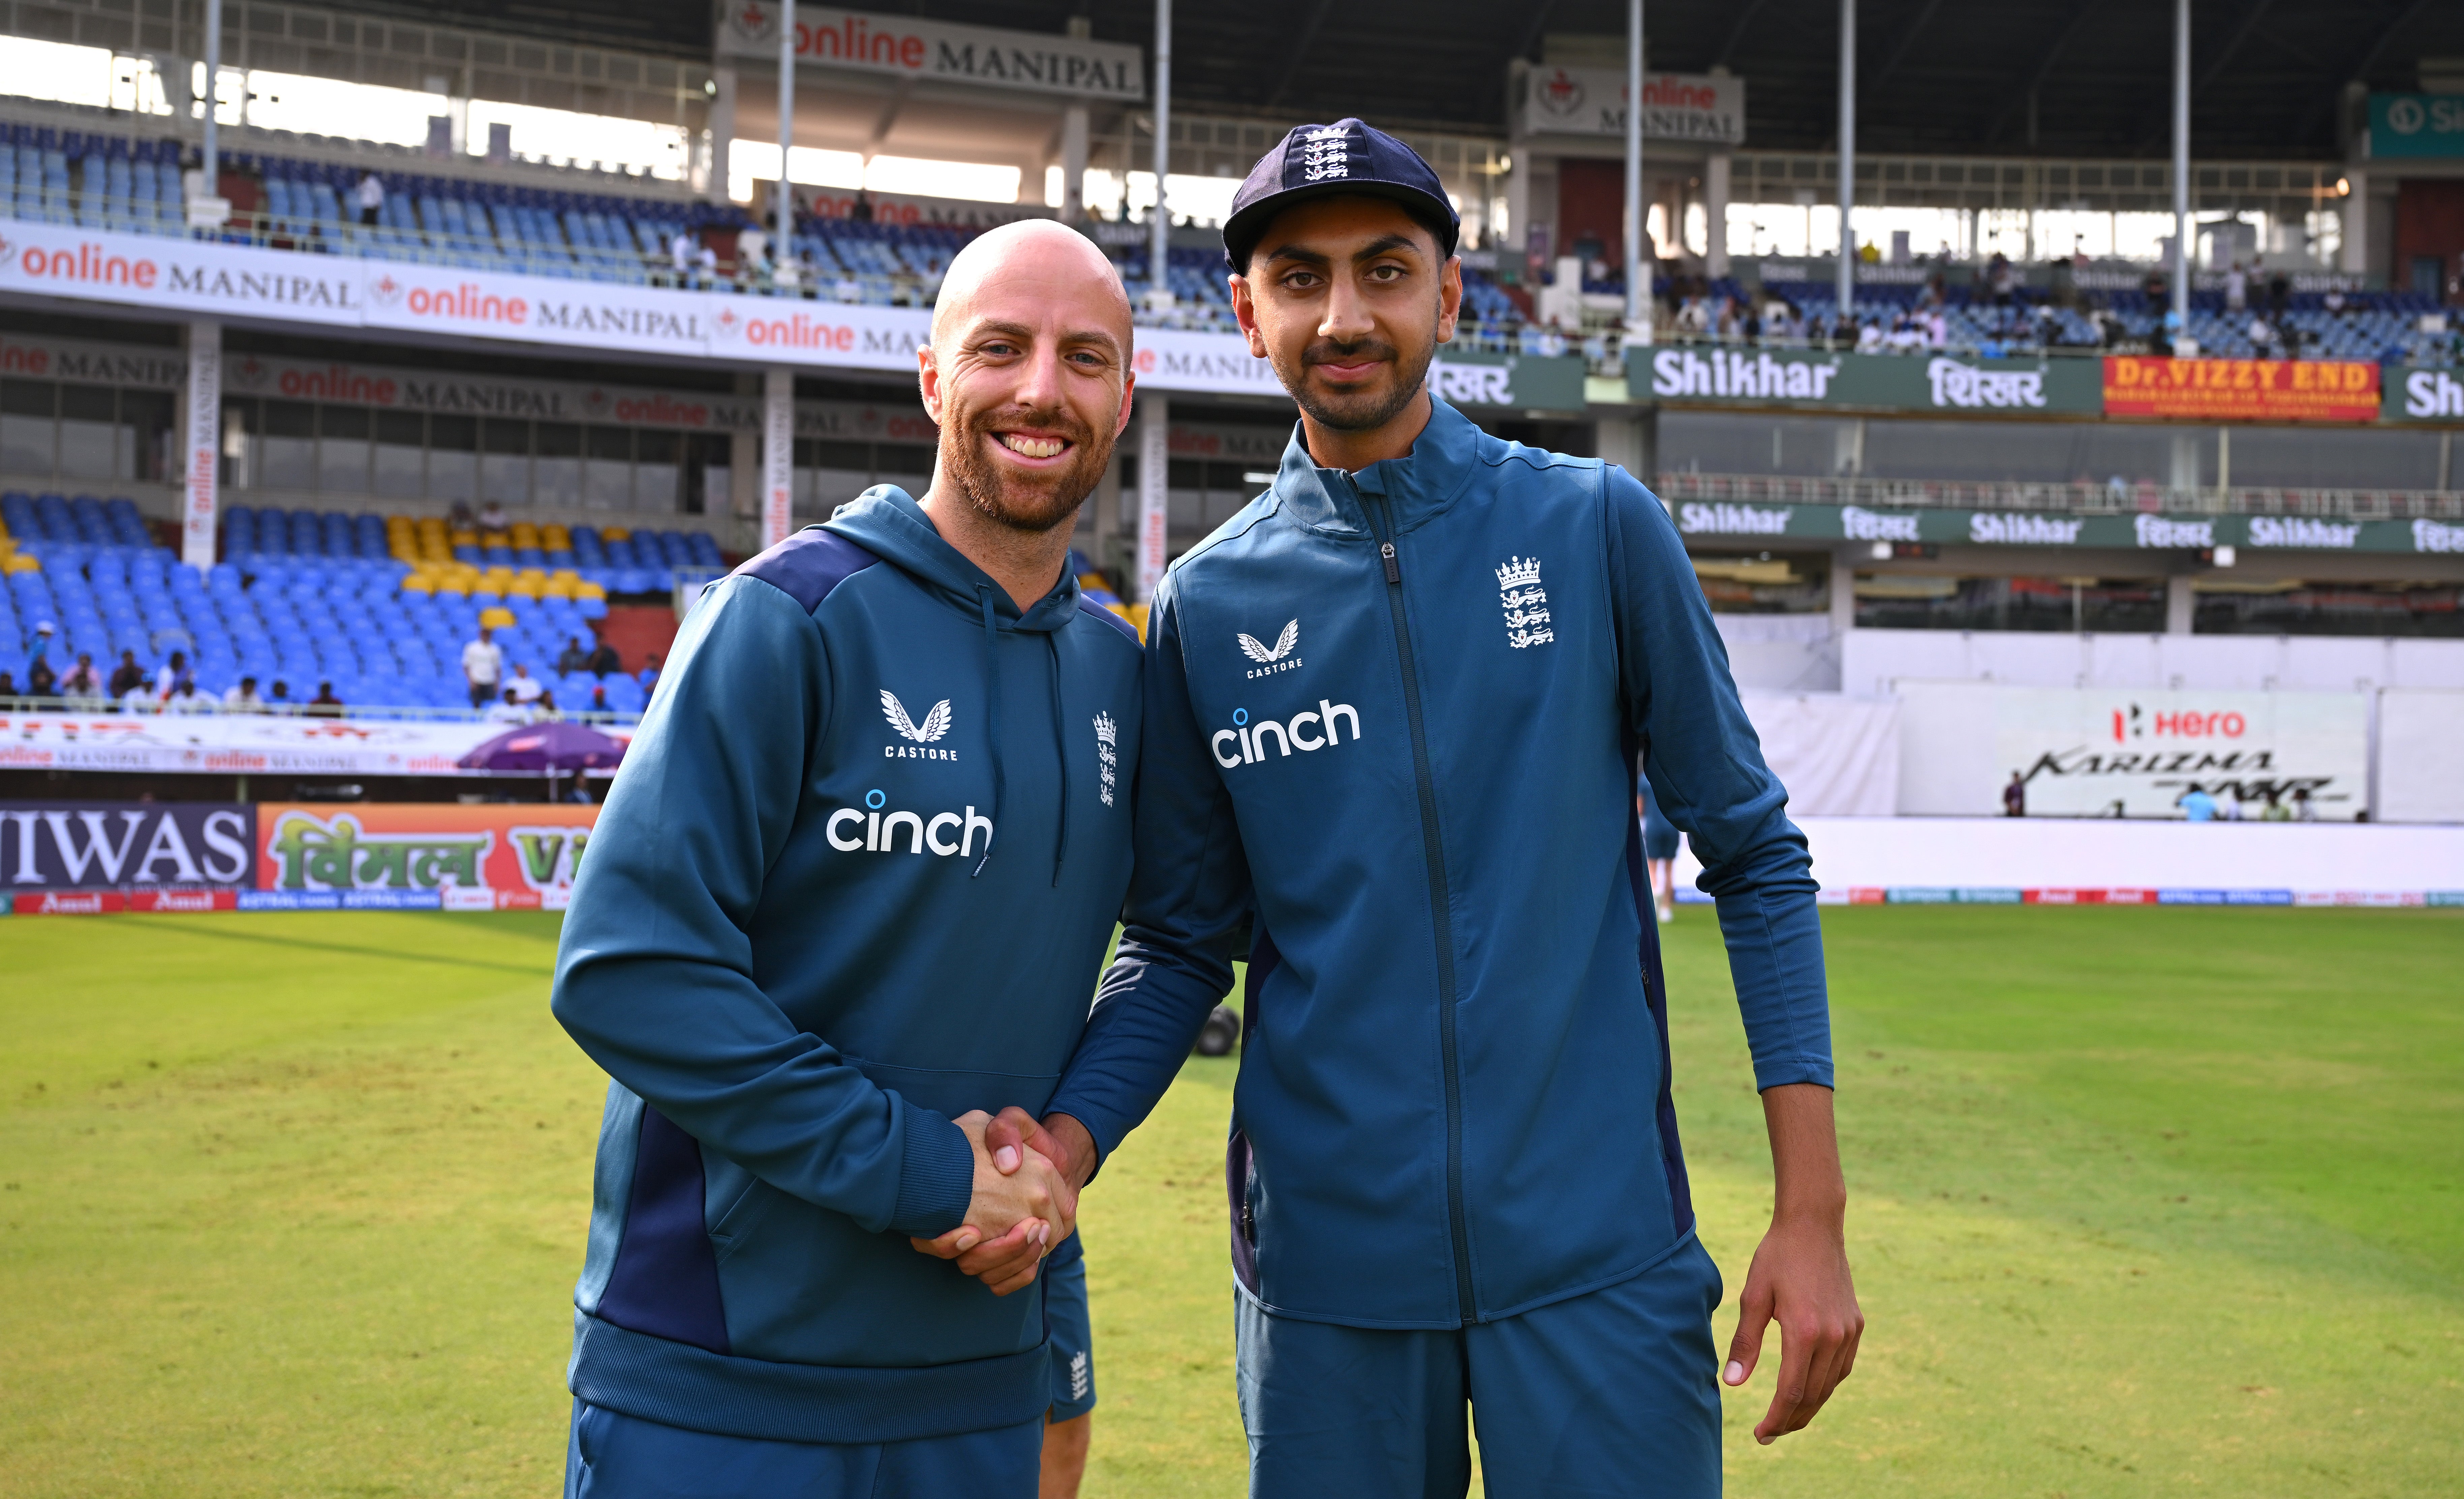 Debutant Shoaib Bashir receives his test cap from Jack Leach prior to day one of the 2nd Test